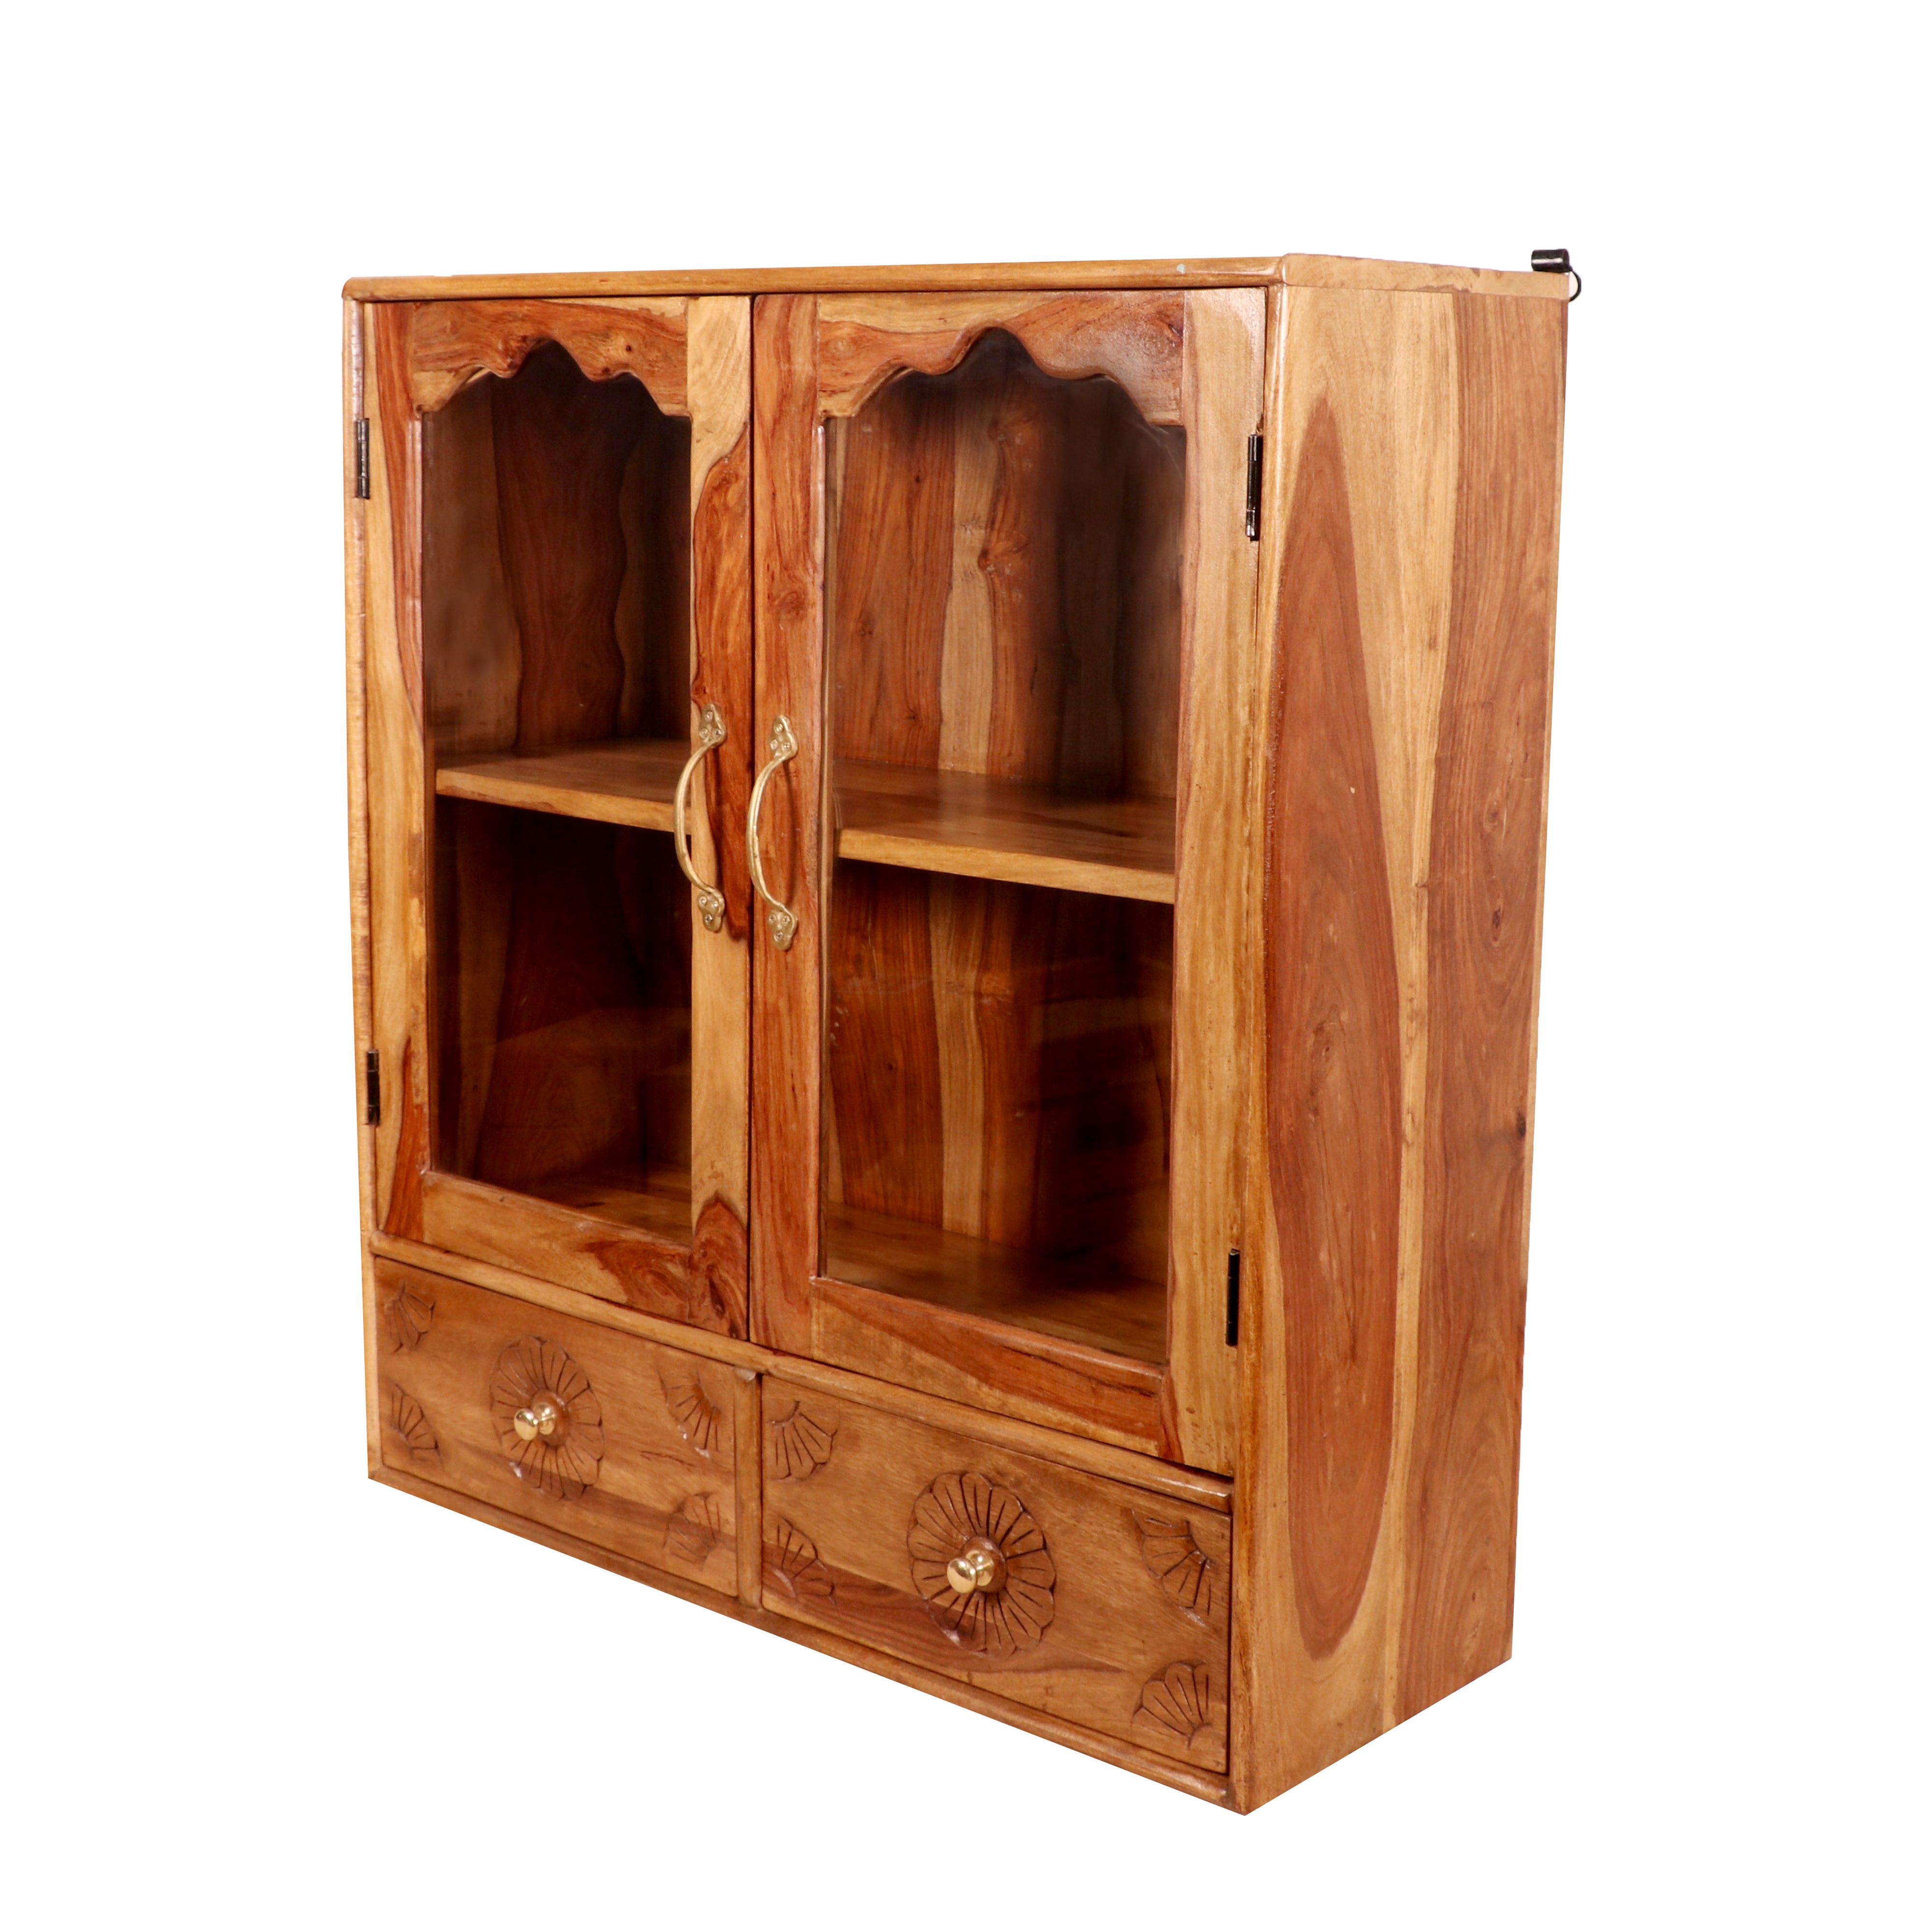 Ironic Traditional Designed Handmade Double Drawer Wooden Cabinet for Home Wall Cabinet